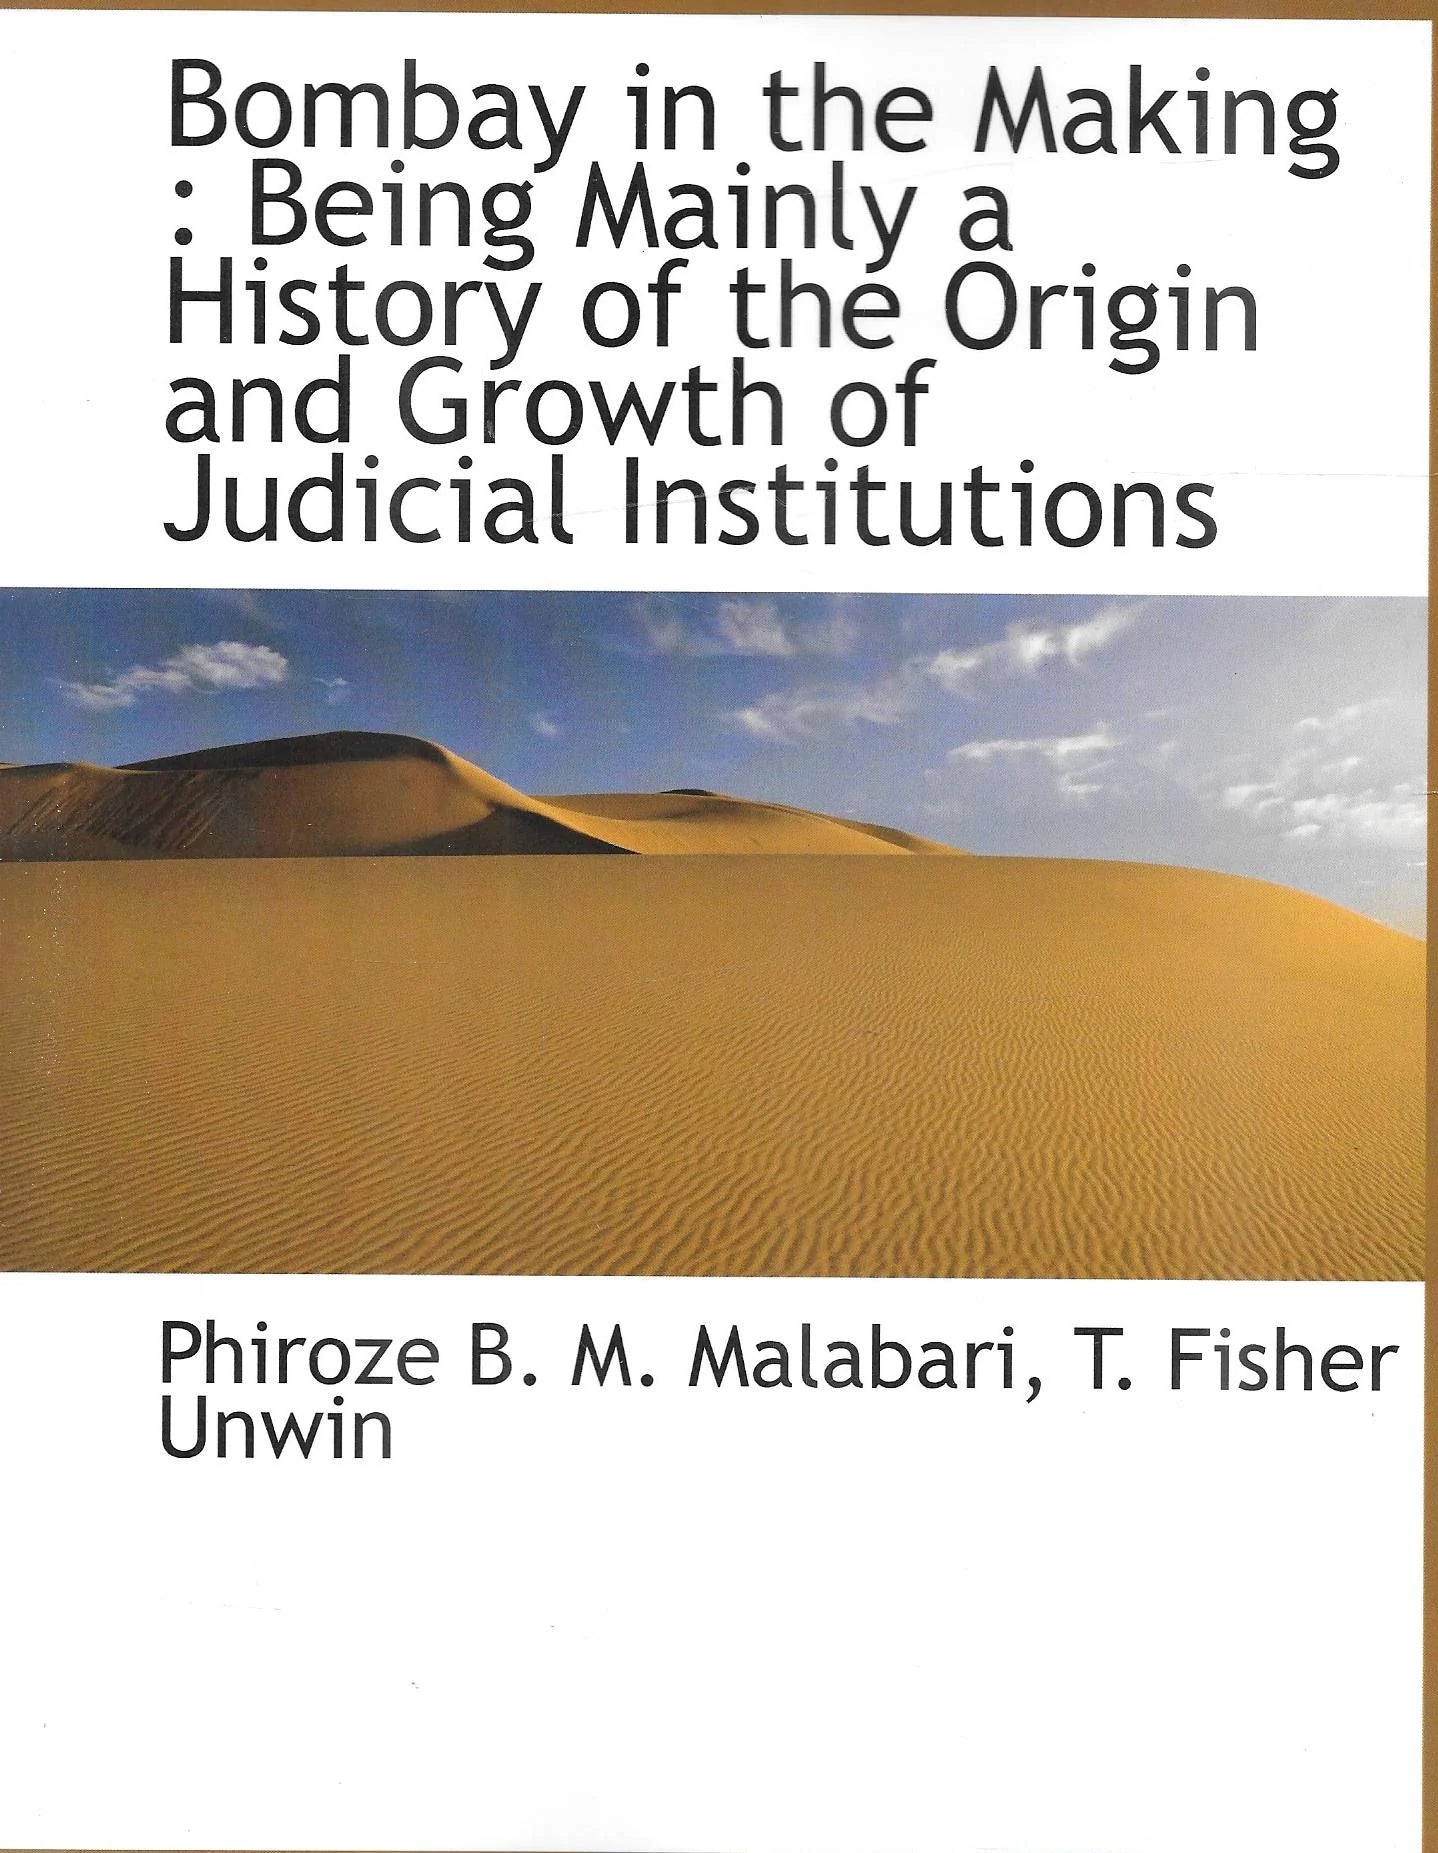 Book Review: "Bombay in the Making: Being Mainly a History of the Origin and Growth of Judicial Institutions" by Phiroze B M Malabari and T Fisher Unwin.